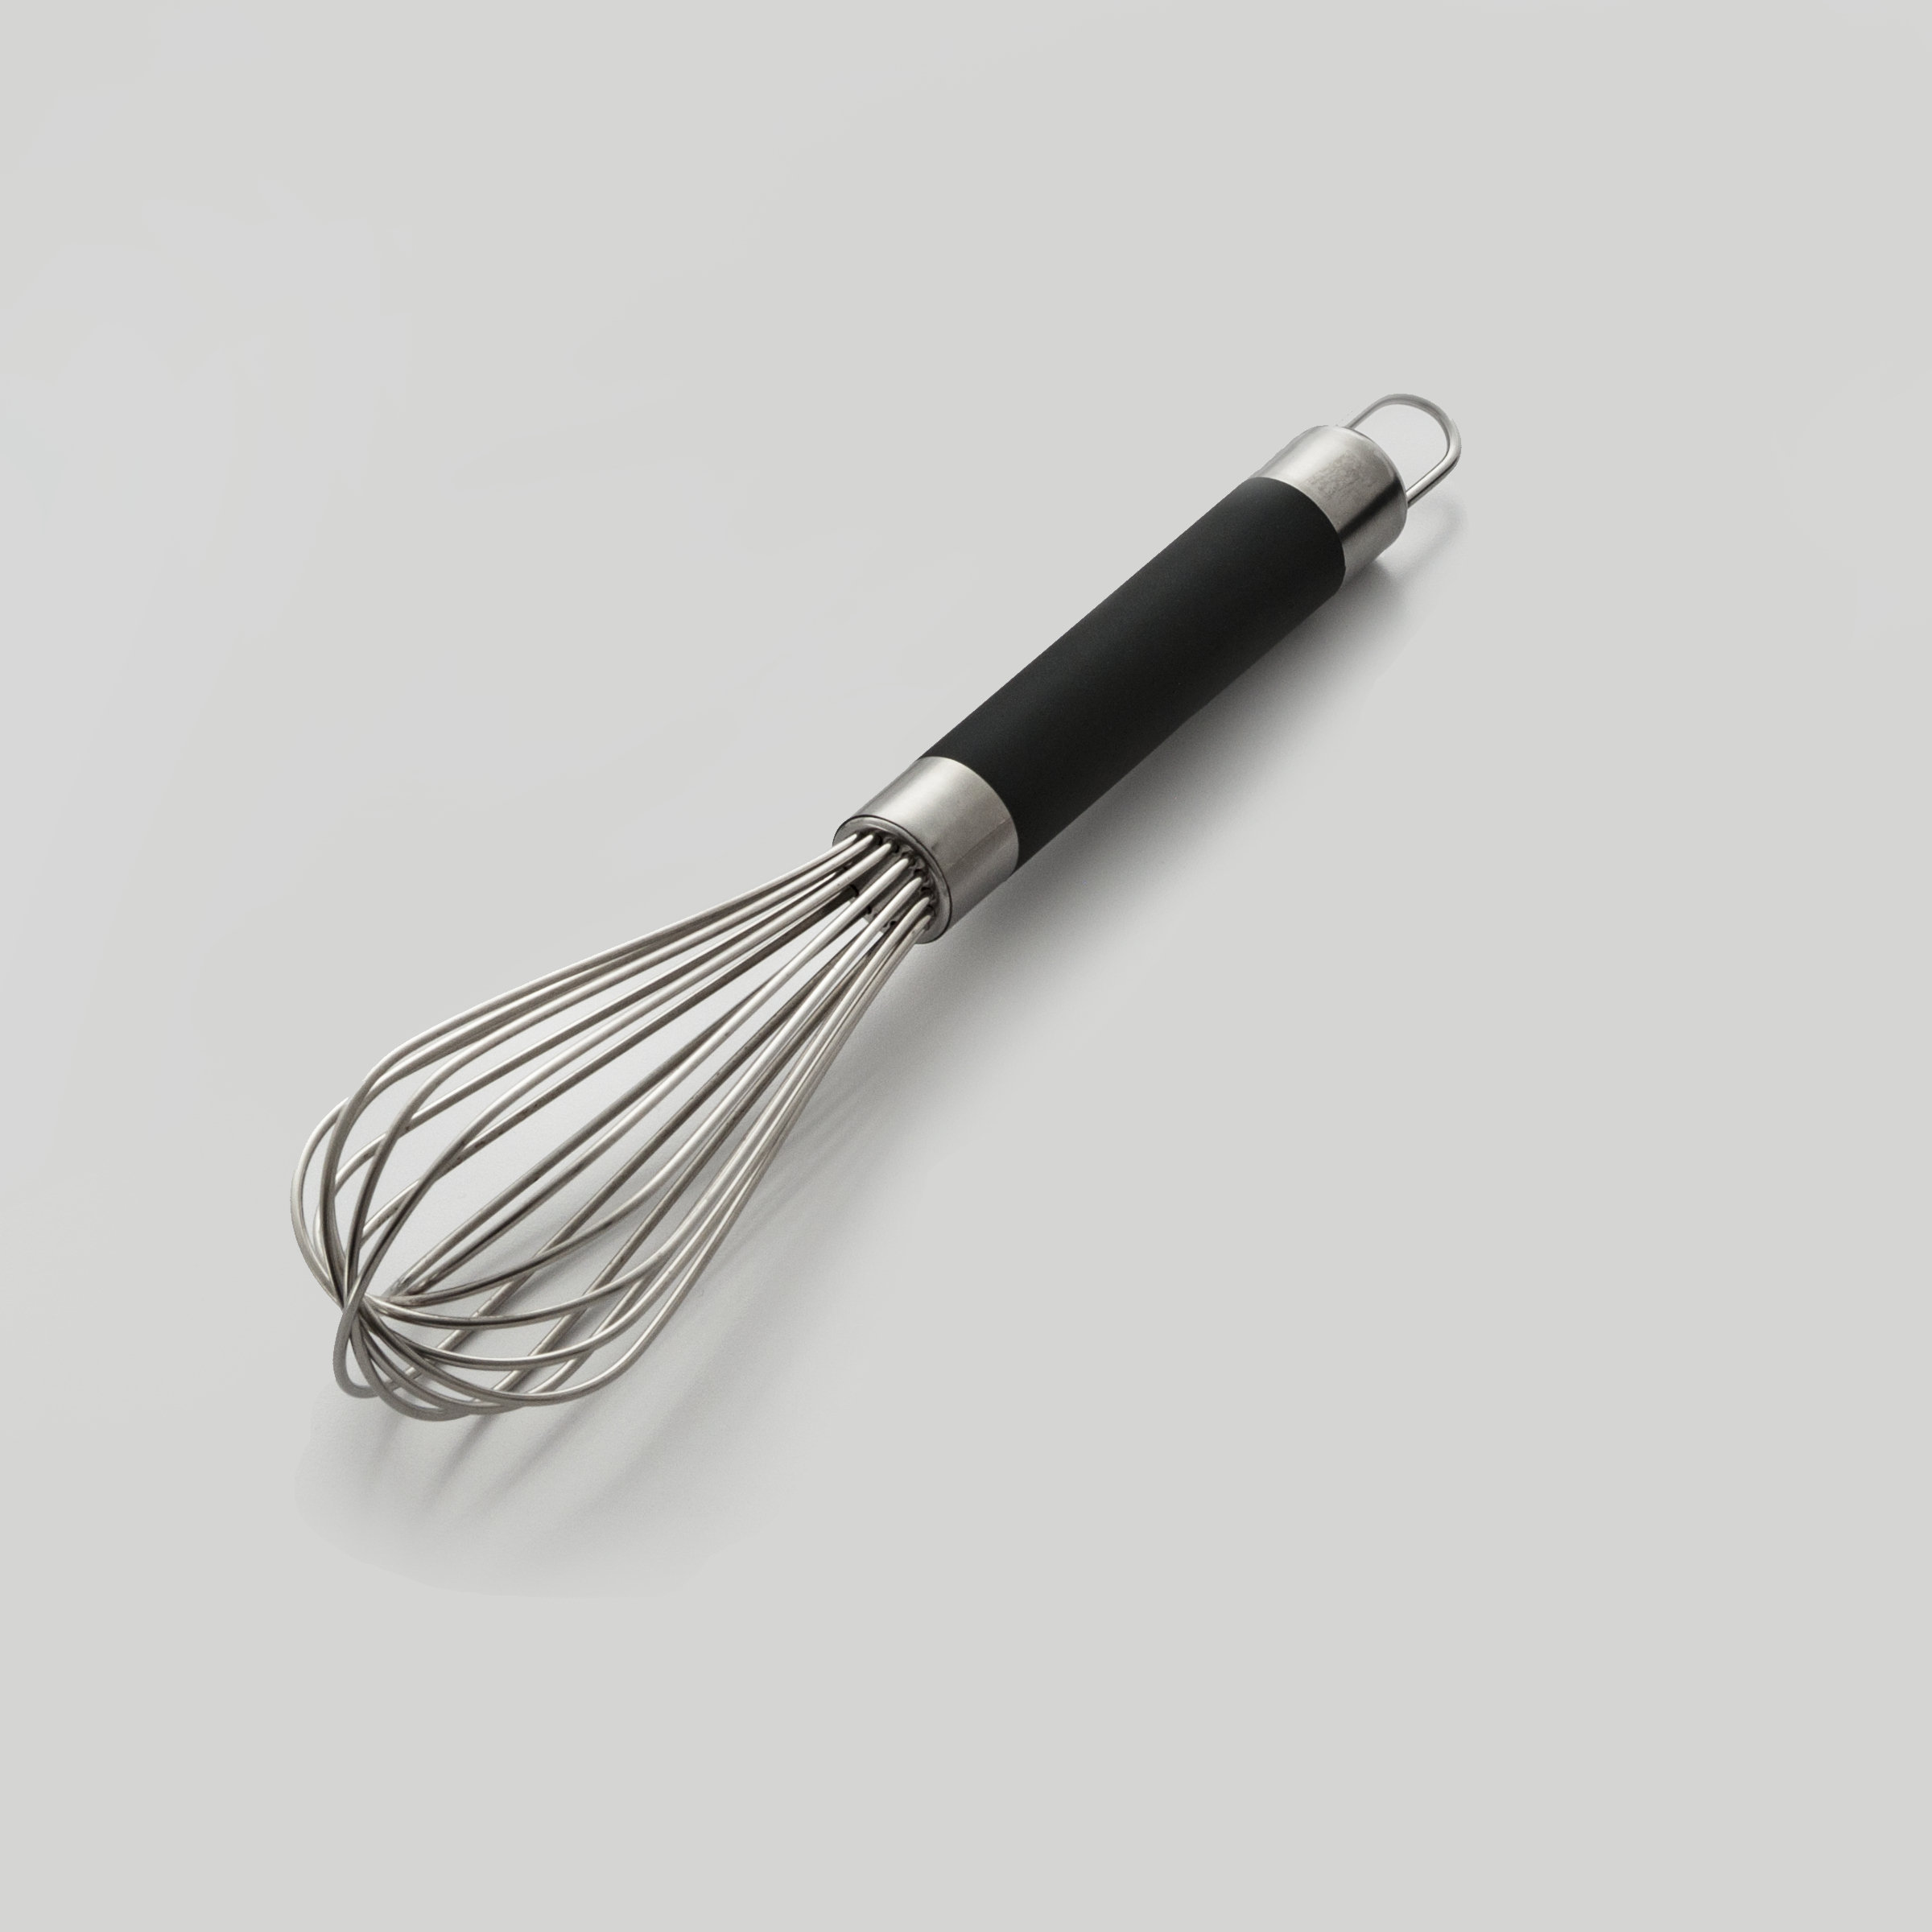 10 in. Professional Stainless Steel Heavy Duty Whisk